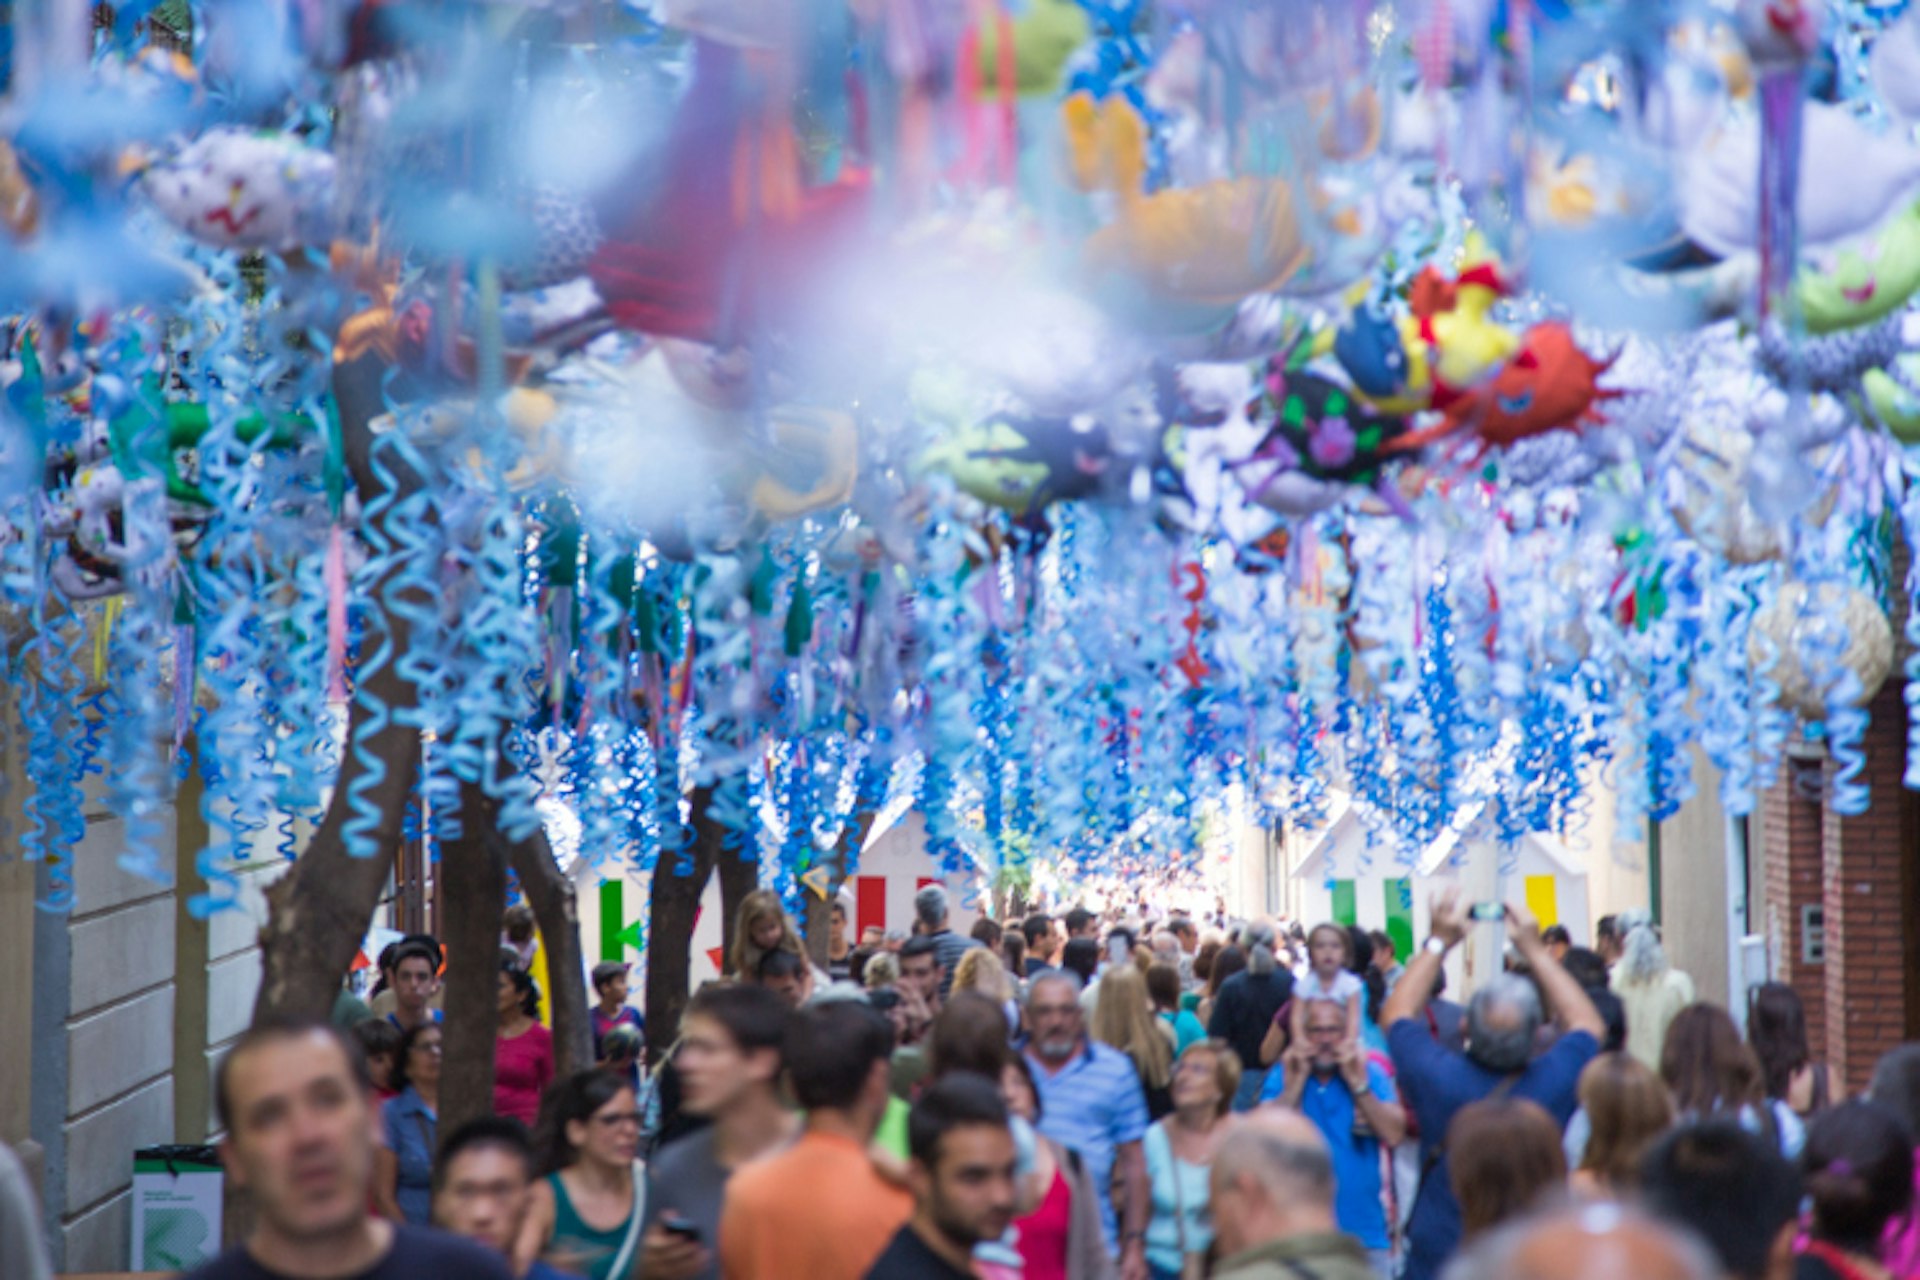 Decorated streets during the Gràcia festival. Image by Artur Debat / Getty images